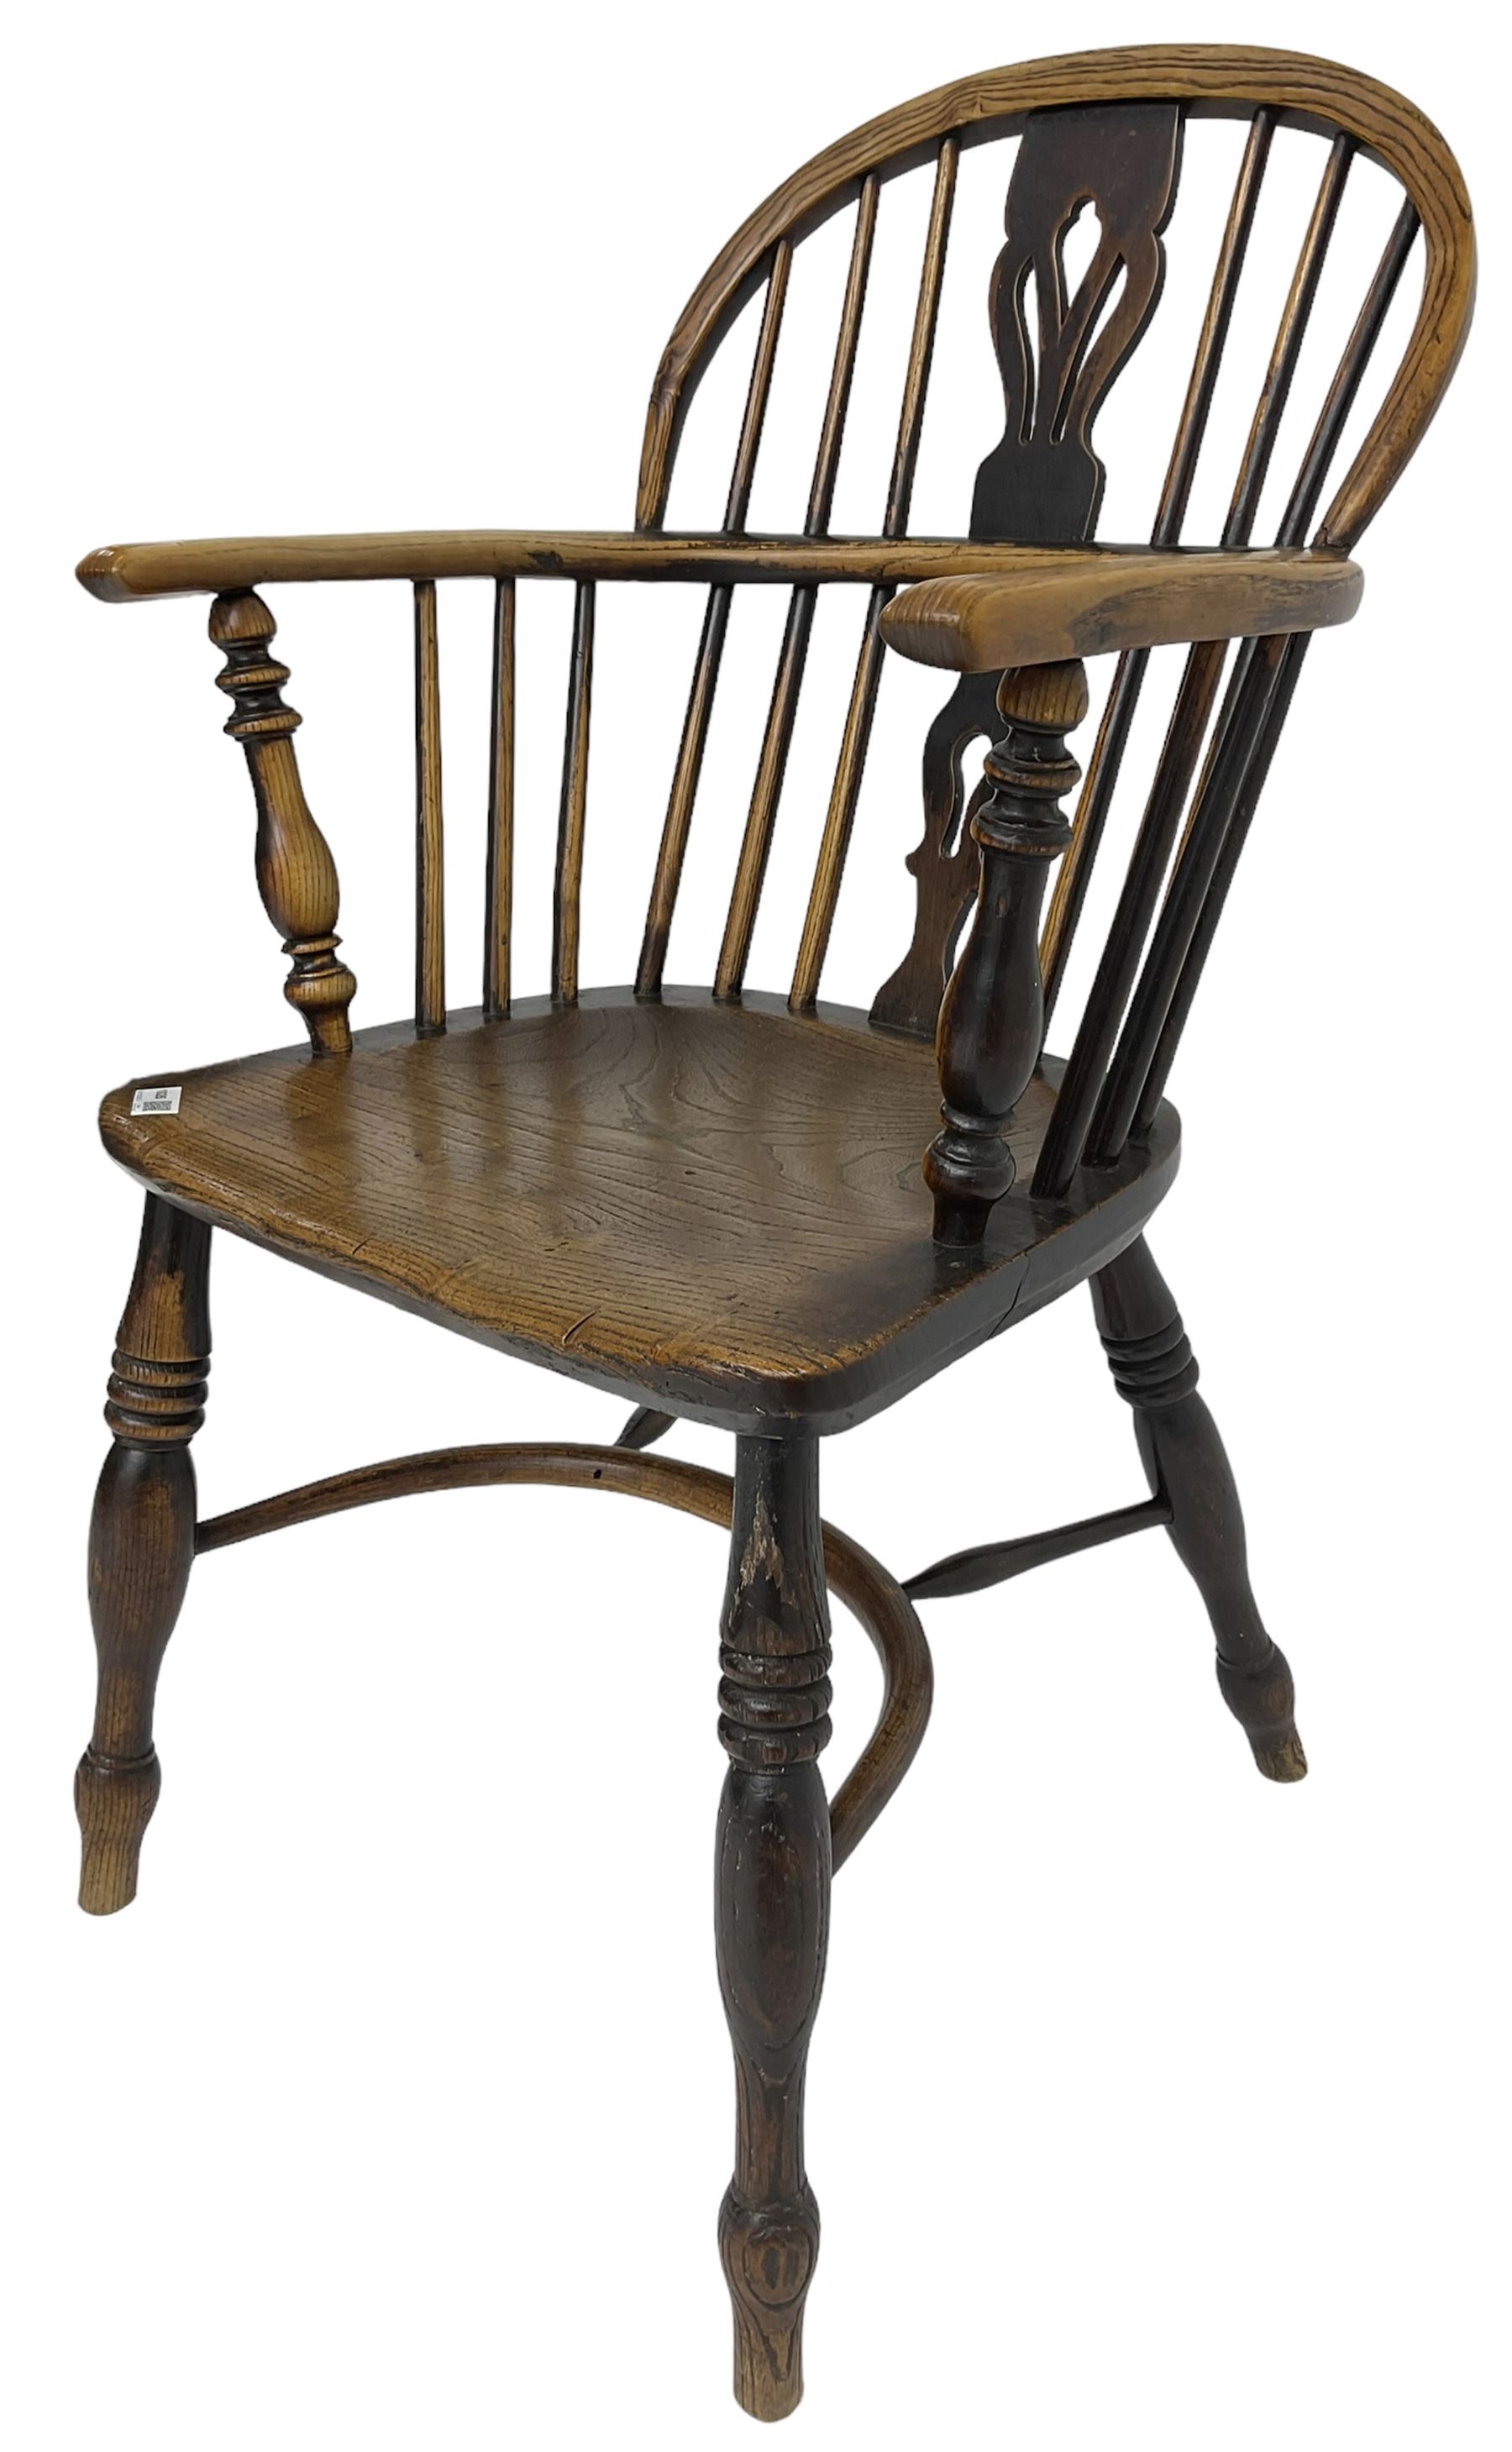 19th century elm and ash Windsor armchair - Image 2 of 7